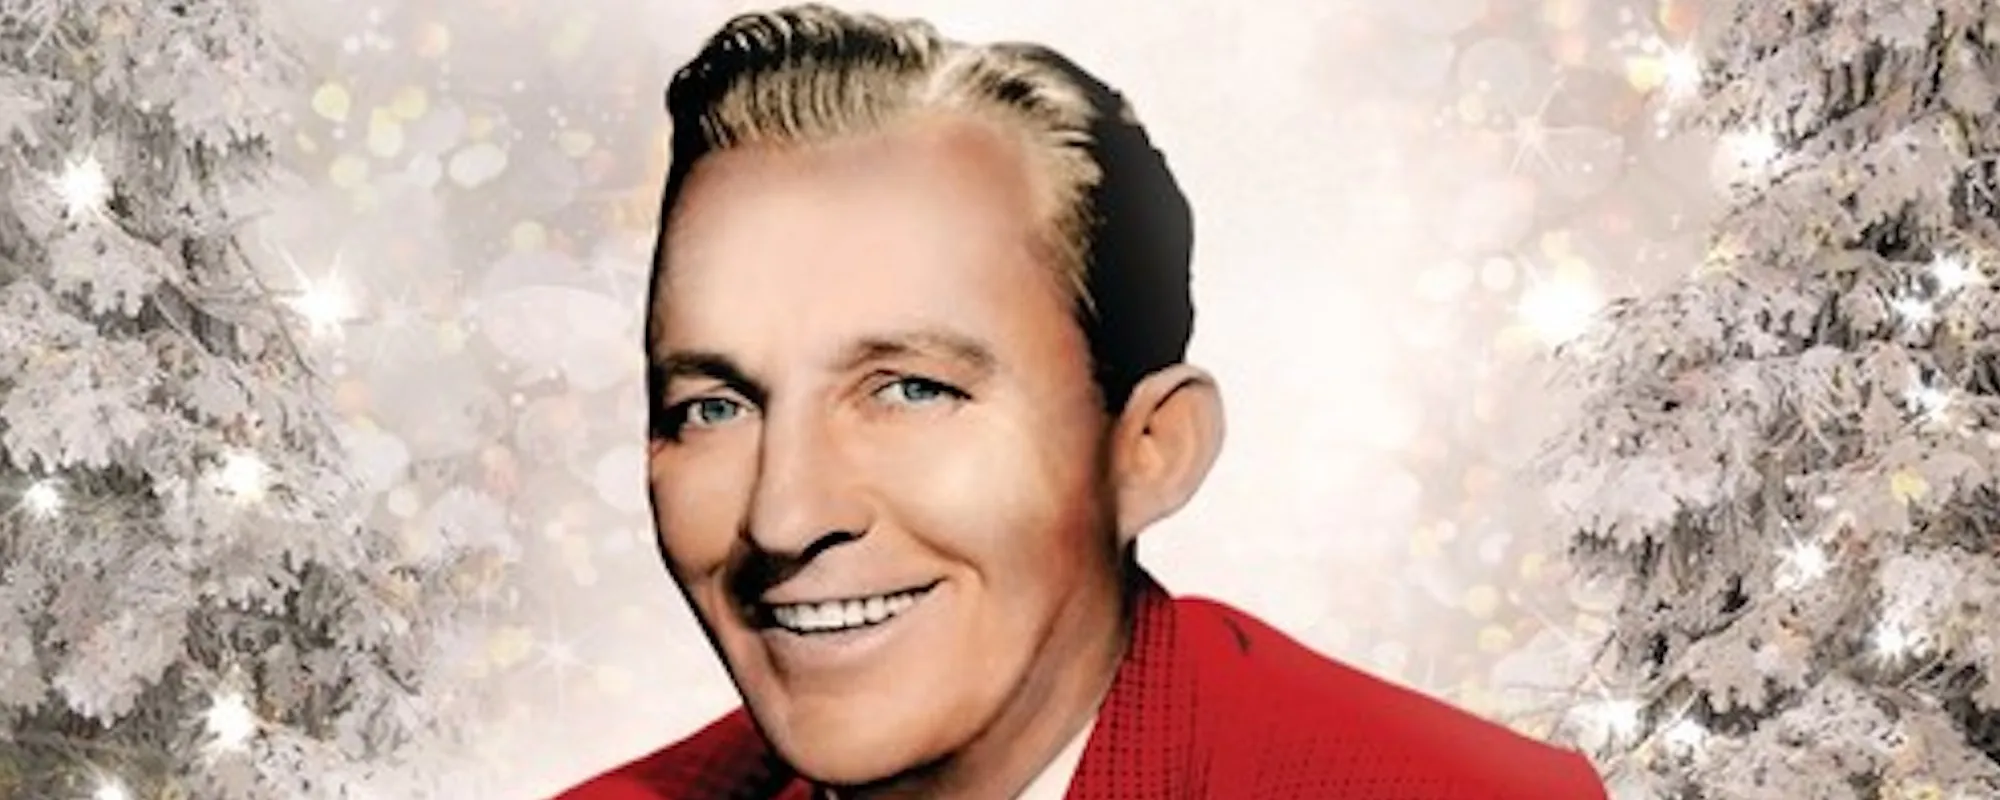 Classic Bing Crosby Songs and Moments for You to Relive: From Movies to Inventions to “White Christmas”